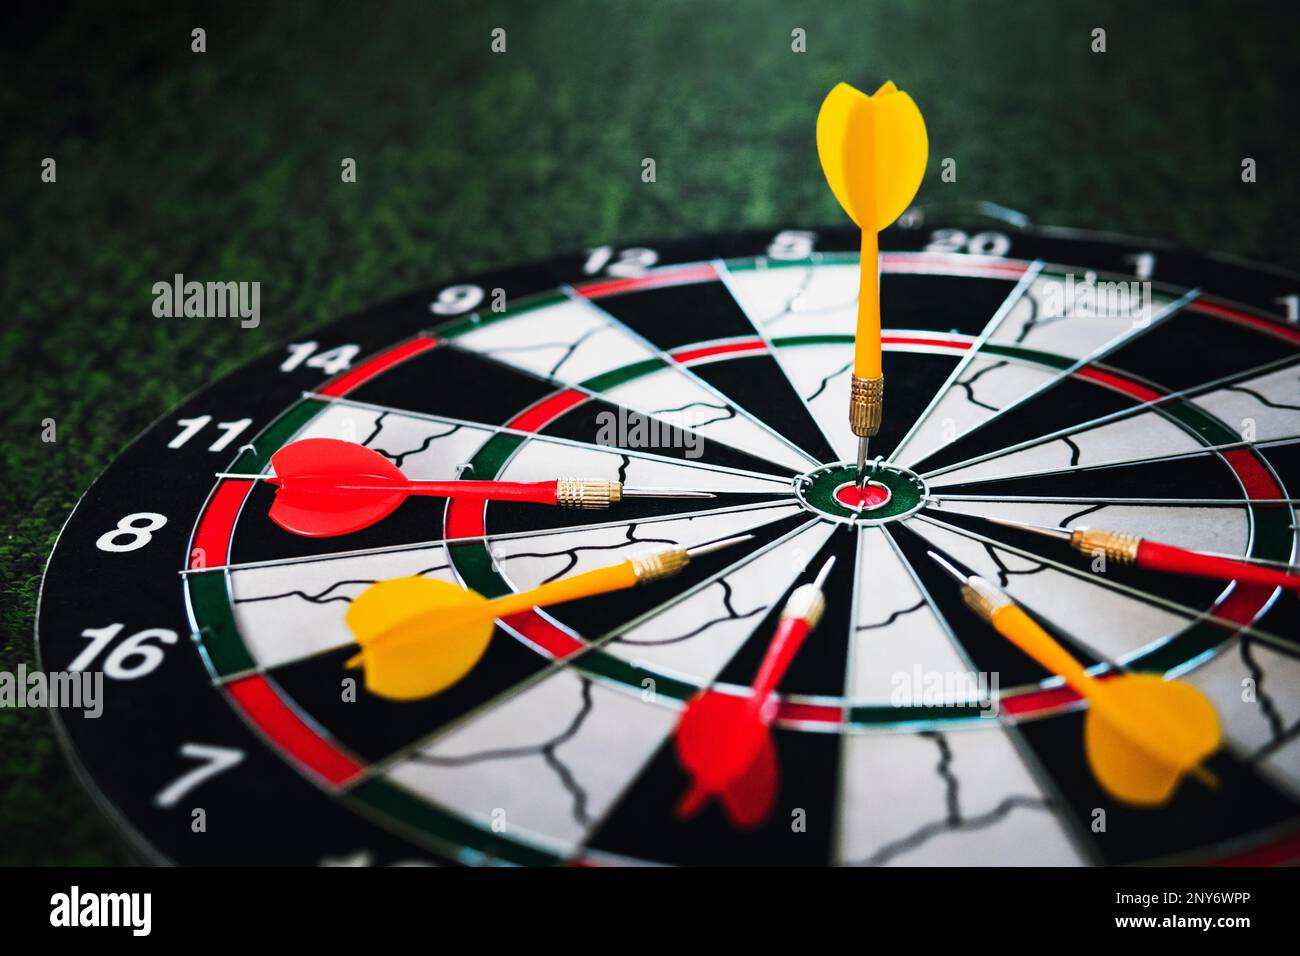 Close up shot of a dart board. Darts arrow Missing the target on a dart board during the game. Darts red and yellow. Stock Photo